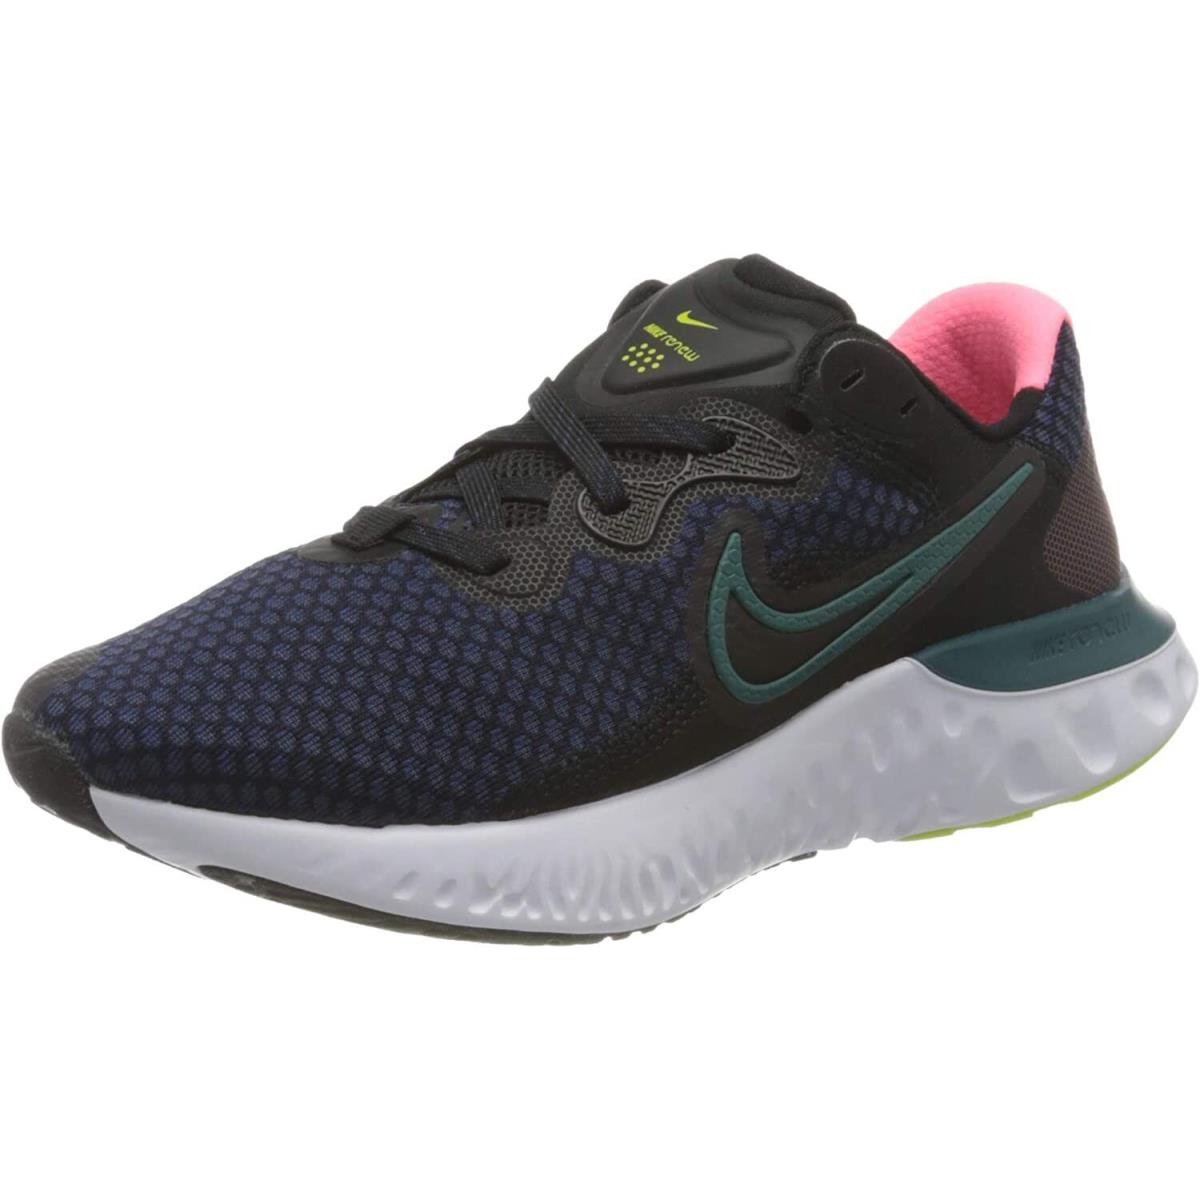 Wmns Nike Women`s Re Run 2 Running Shoes CU3505 004 Size 7 US with Box